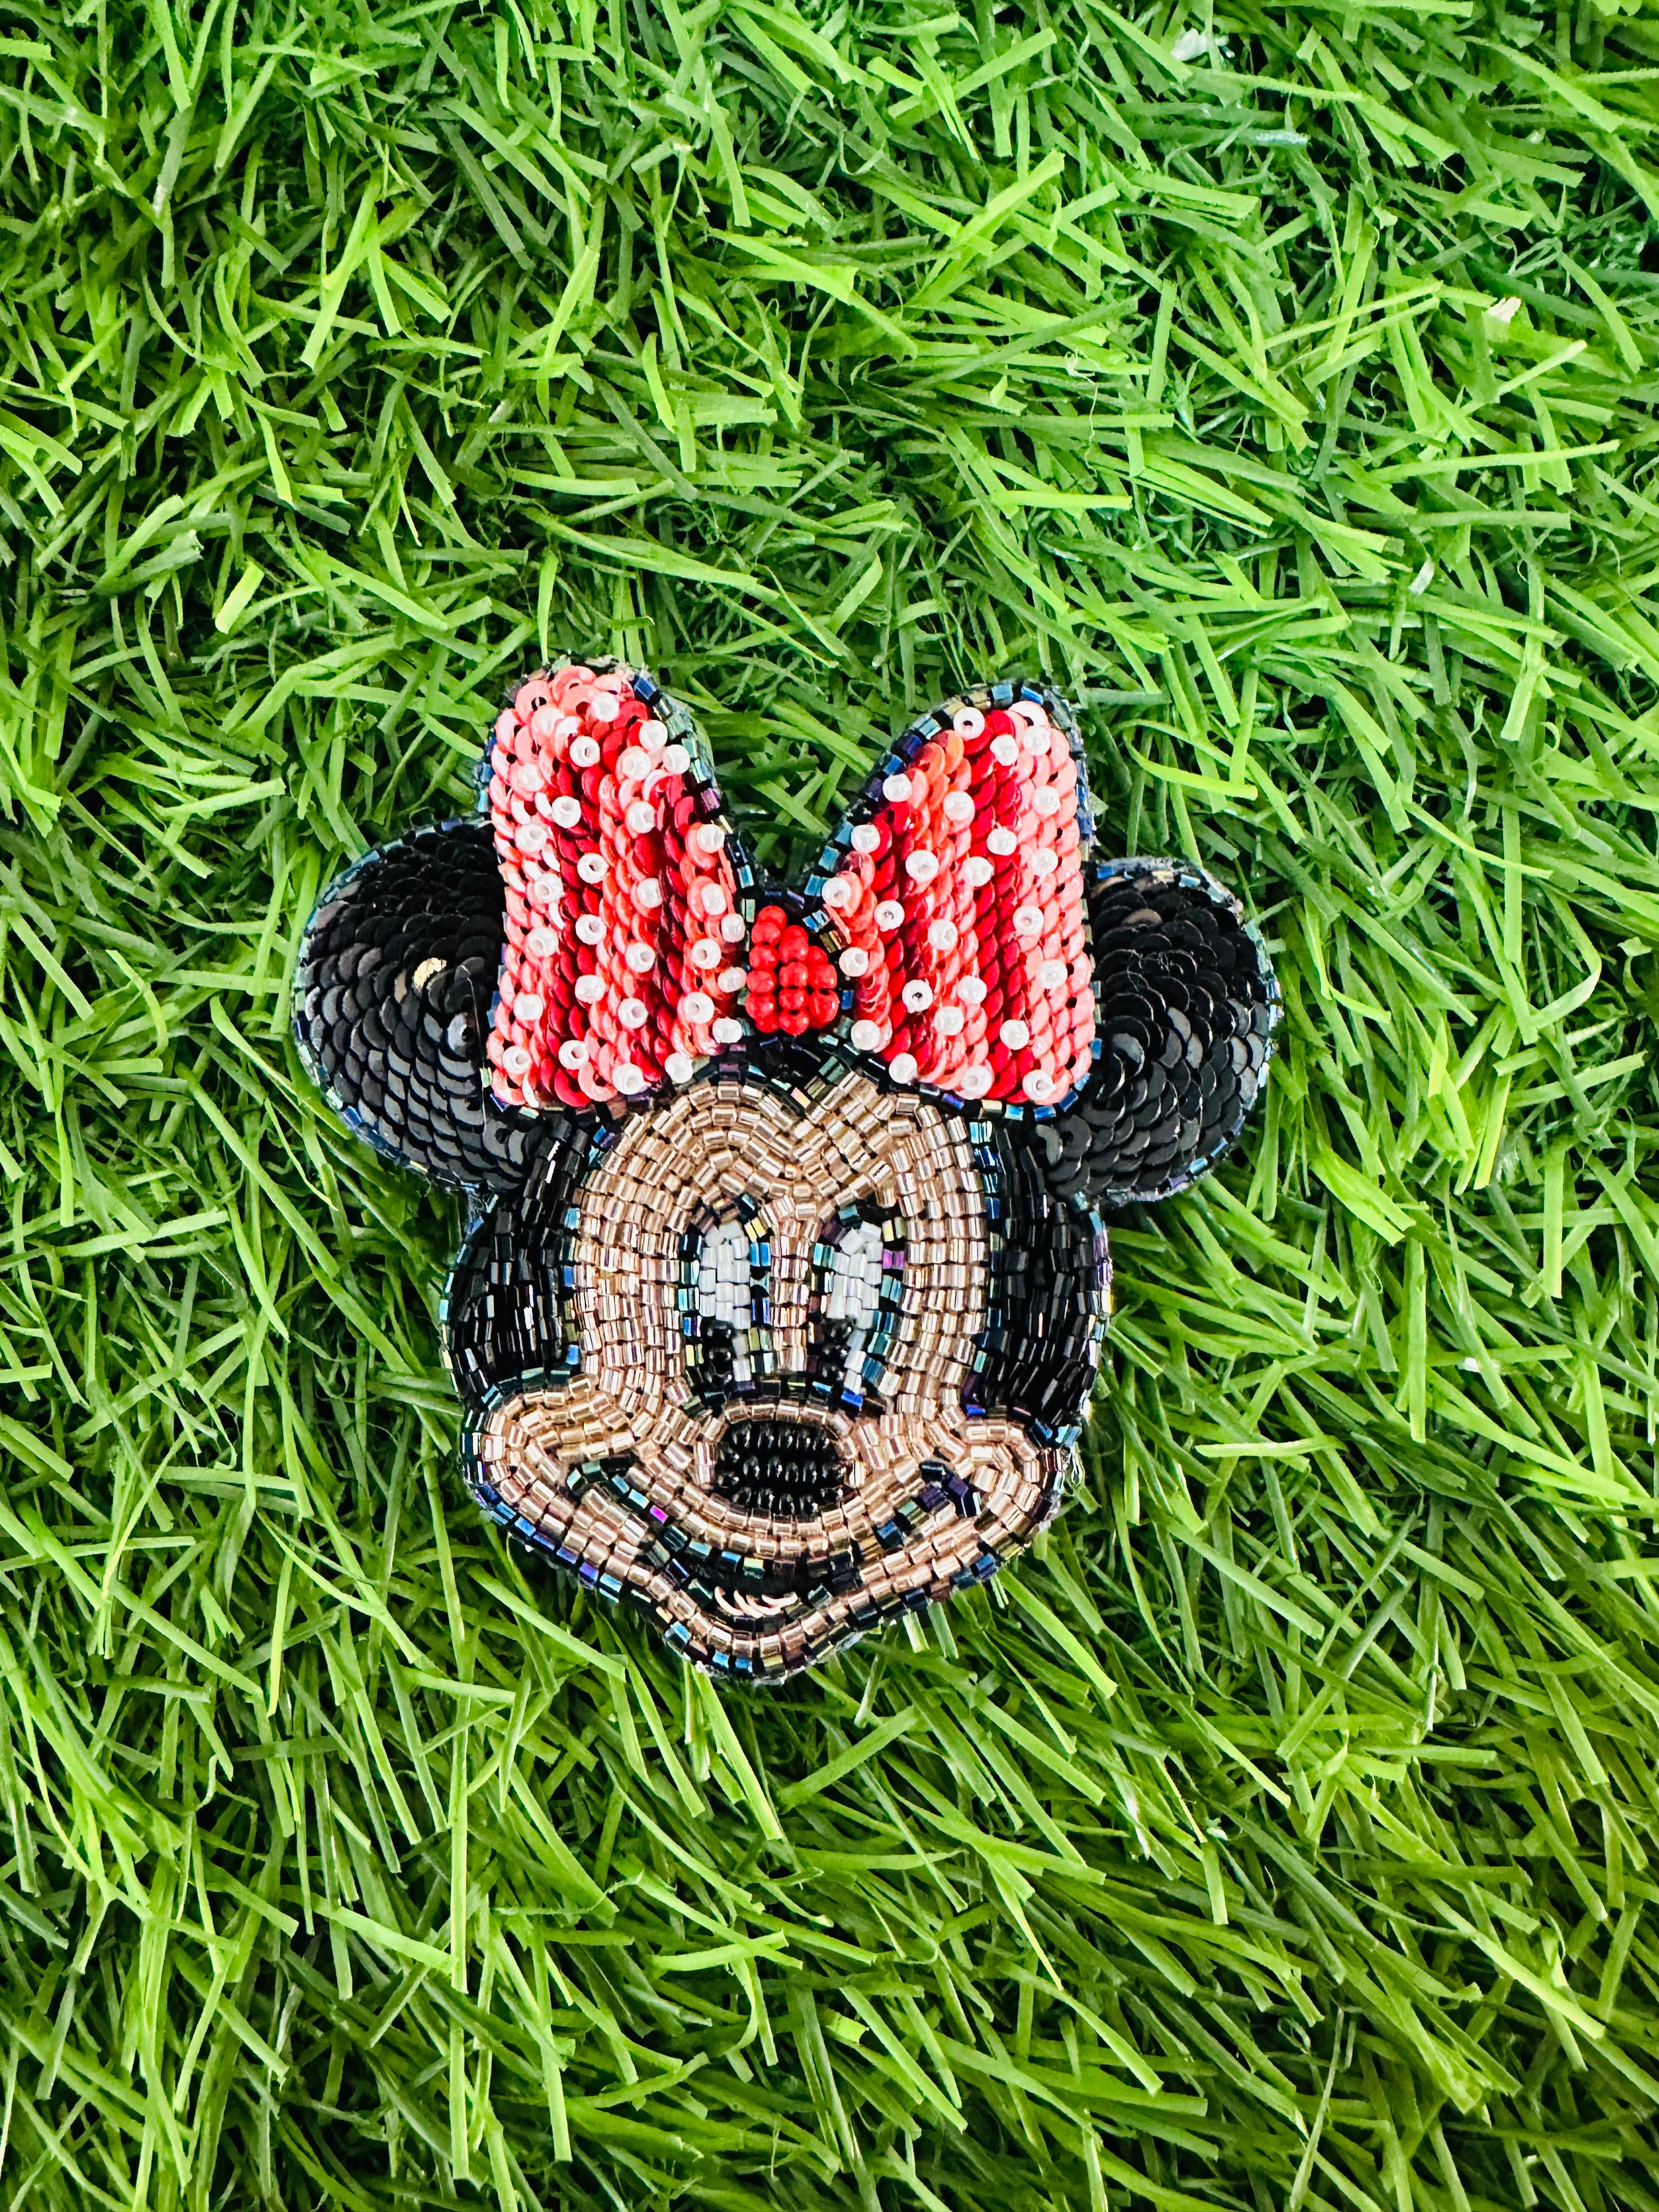 Minnie Mouse Brooch